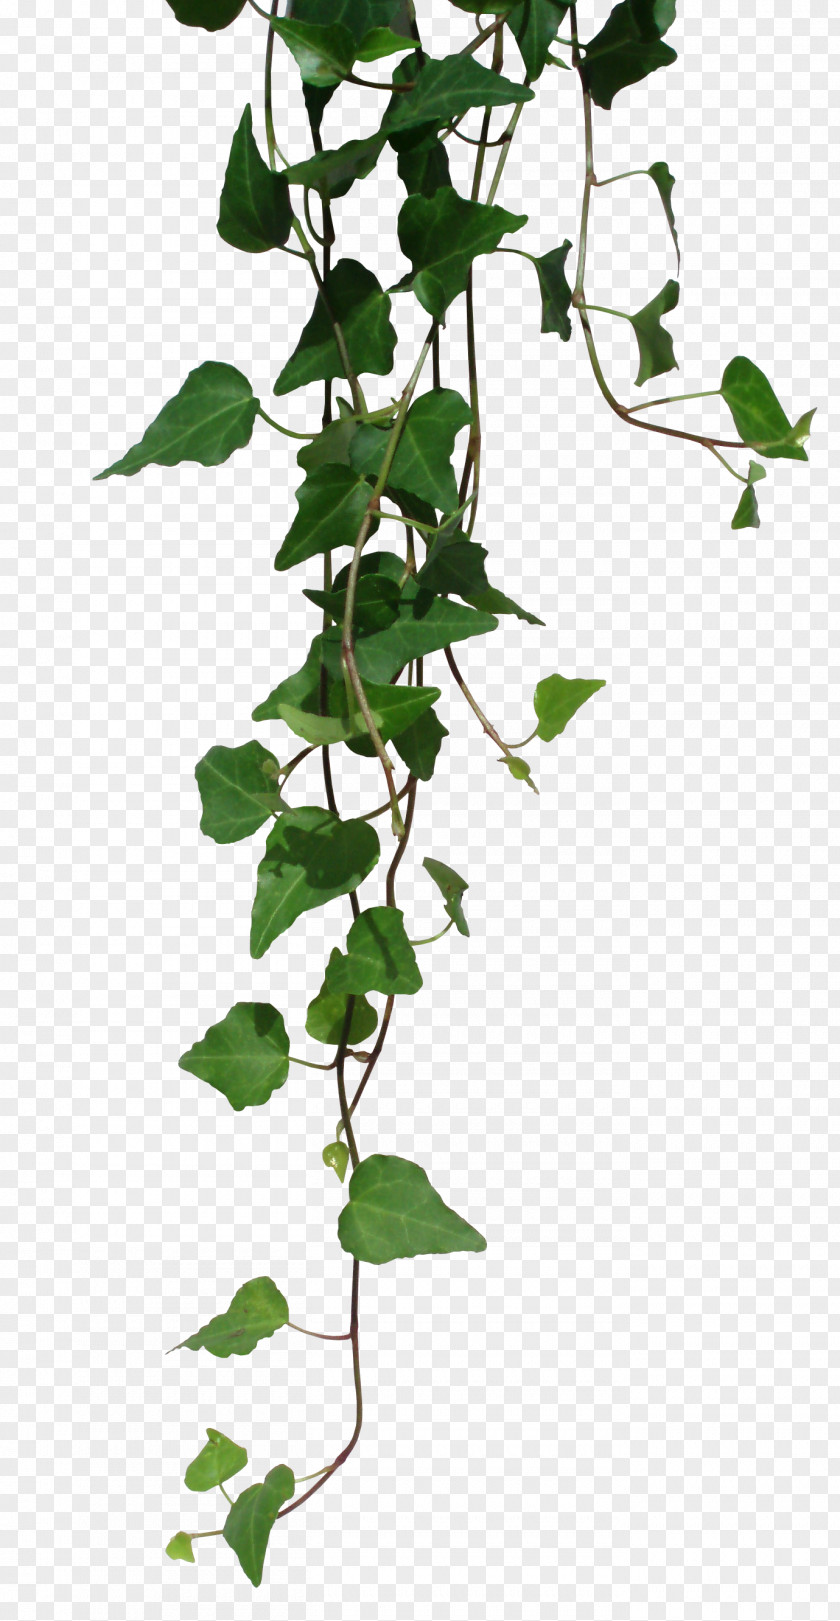 Transparent Vines Unearthed Arcana Dungeons & Dragons Pathfinder Roleplaying Game Weapon Elf PNG